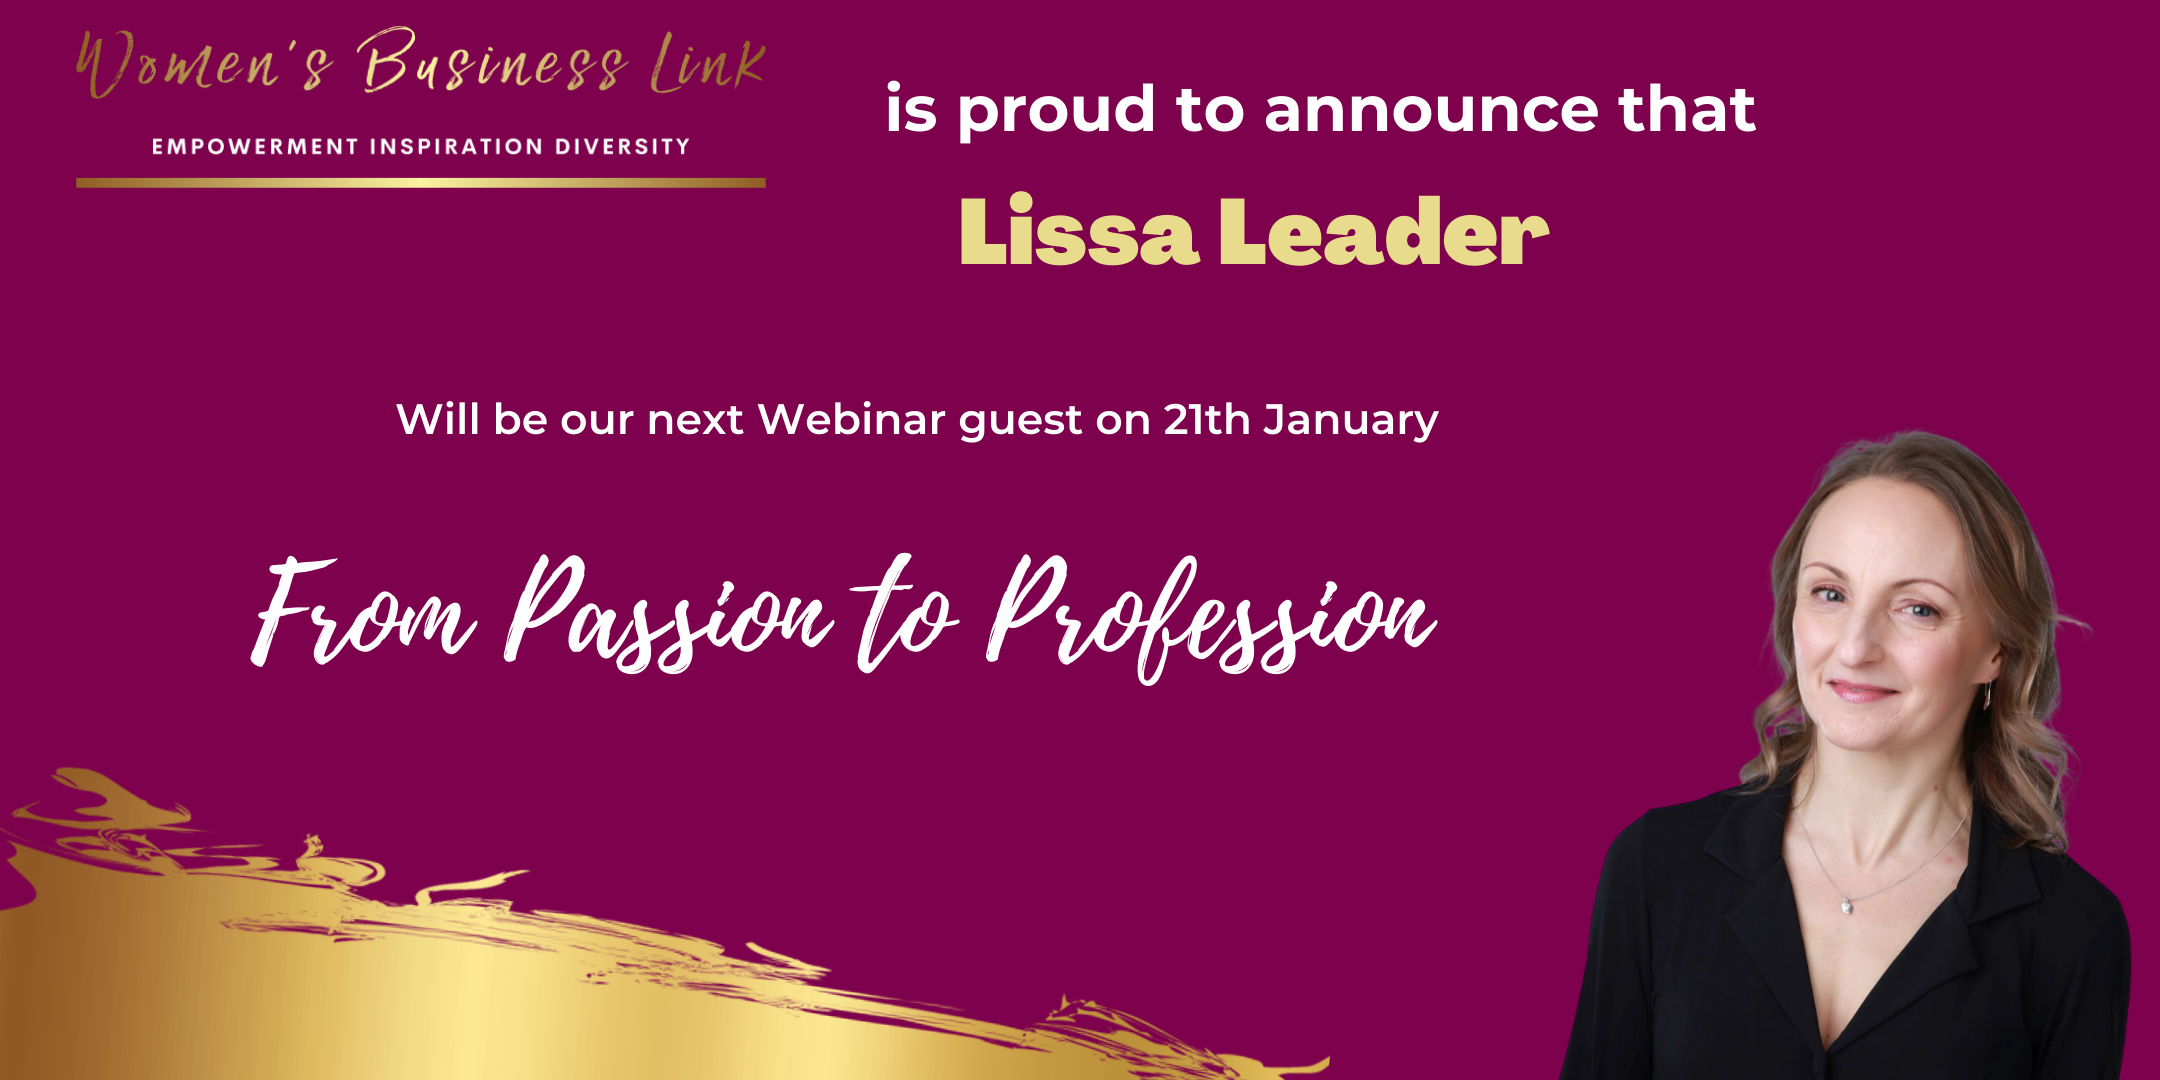 From Passion to Profession. A Women's Business Link webinar with Lissa Leader.